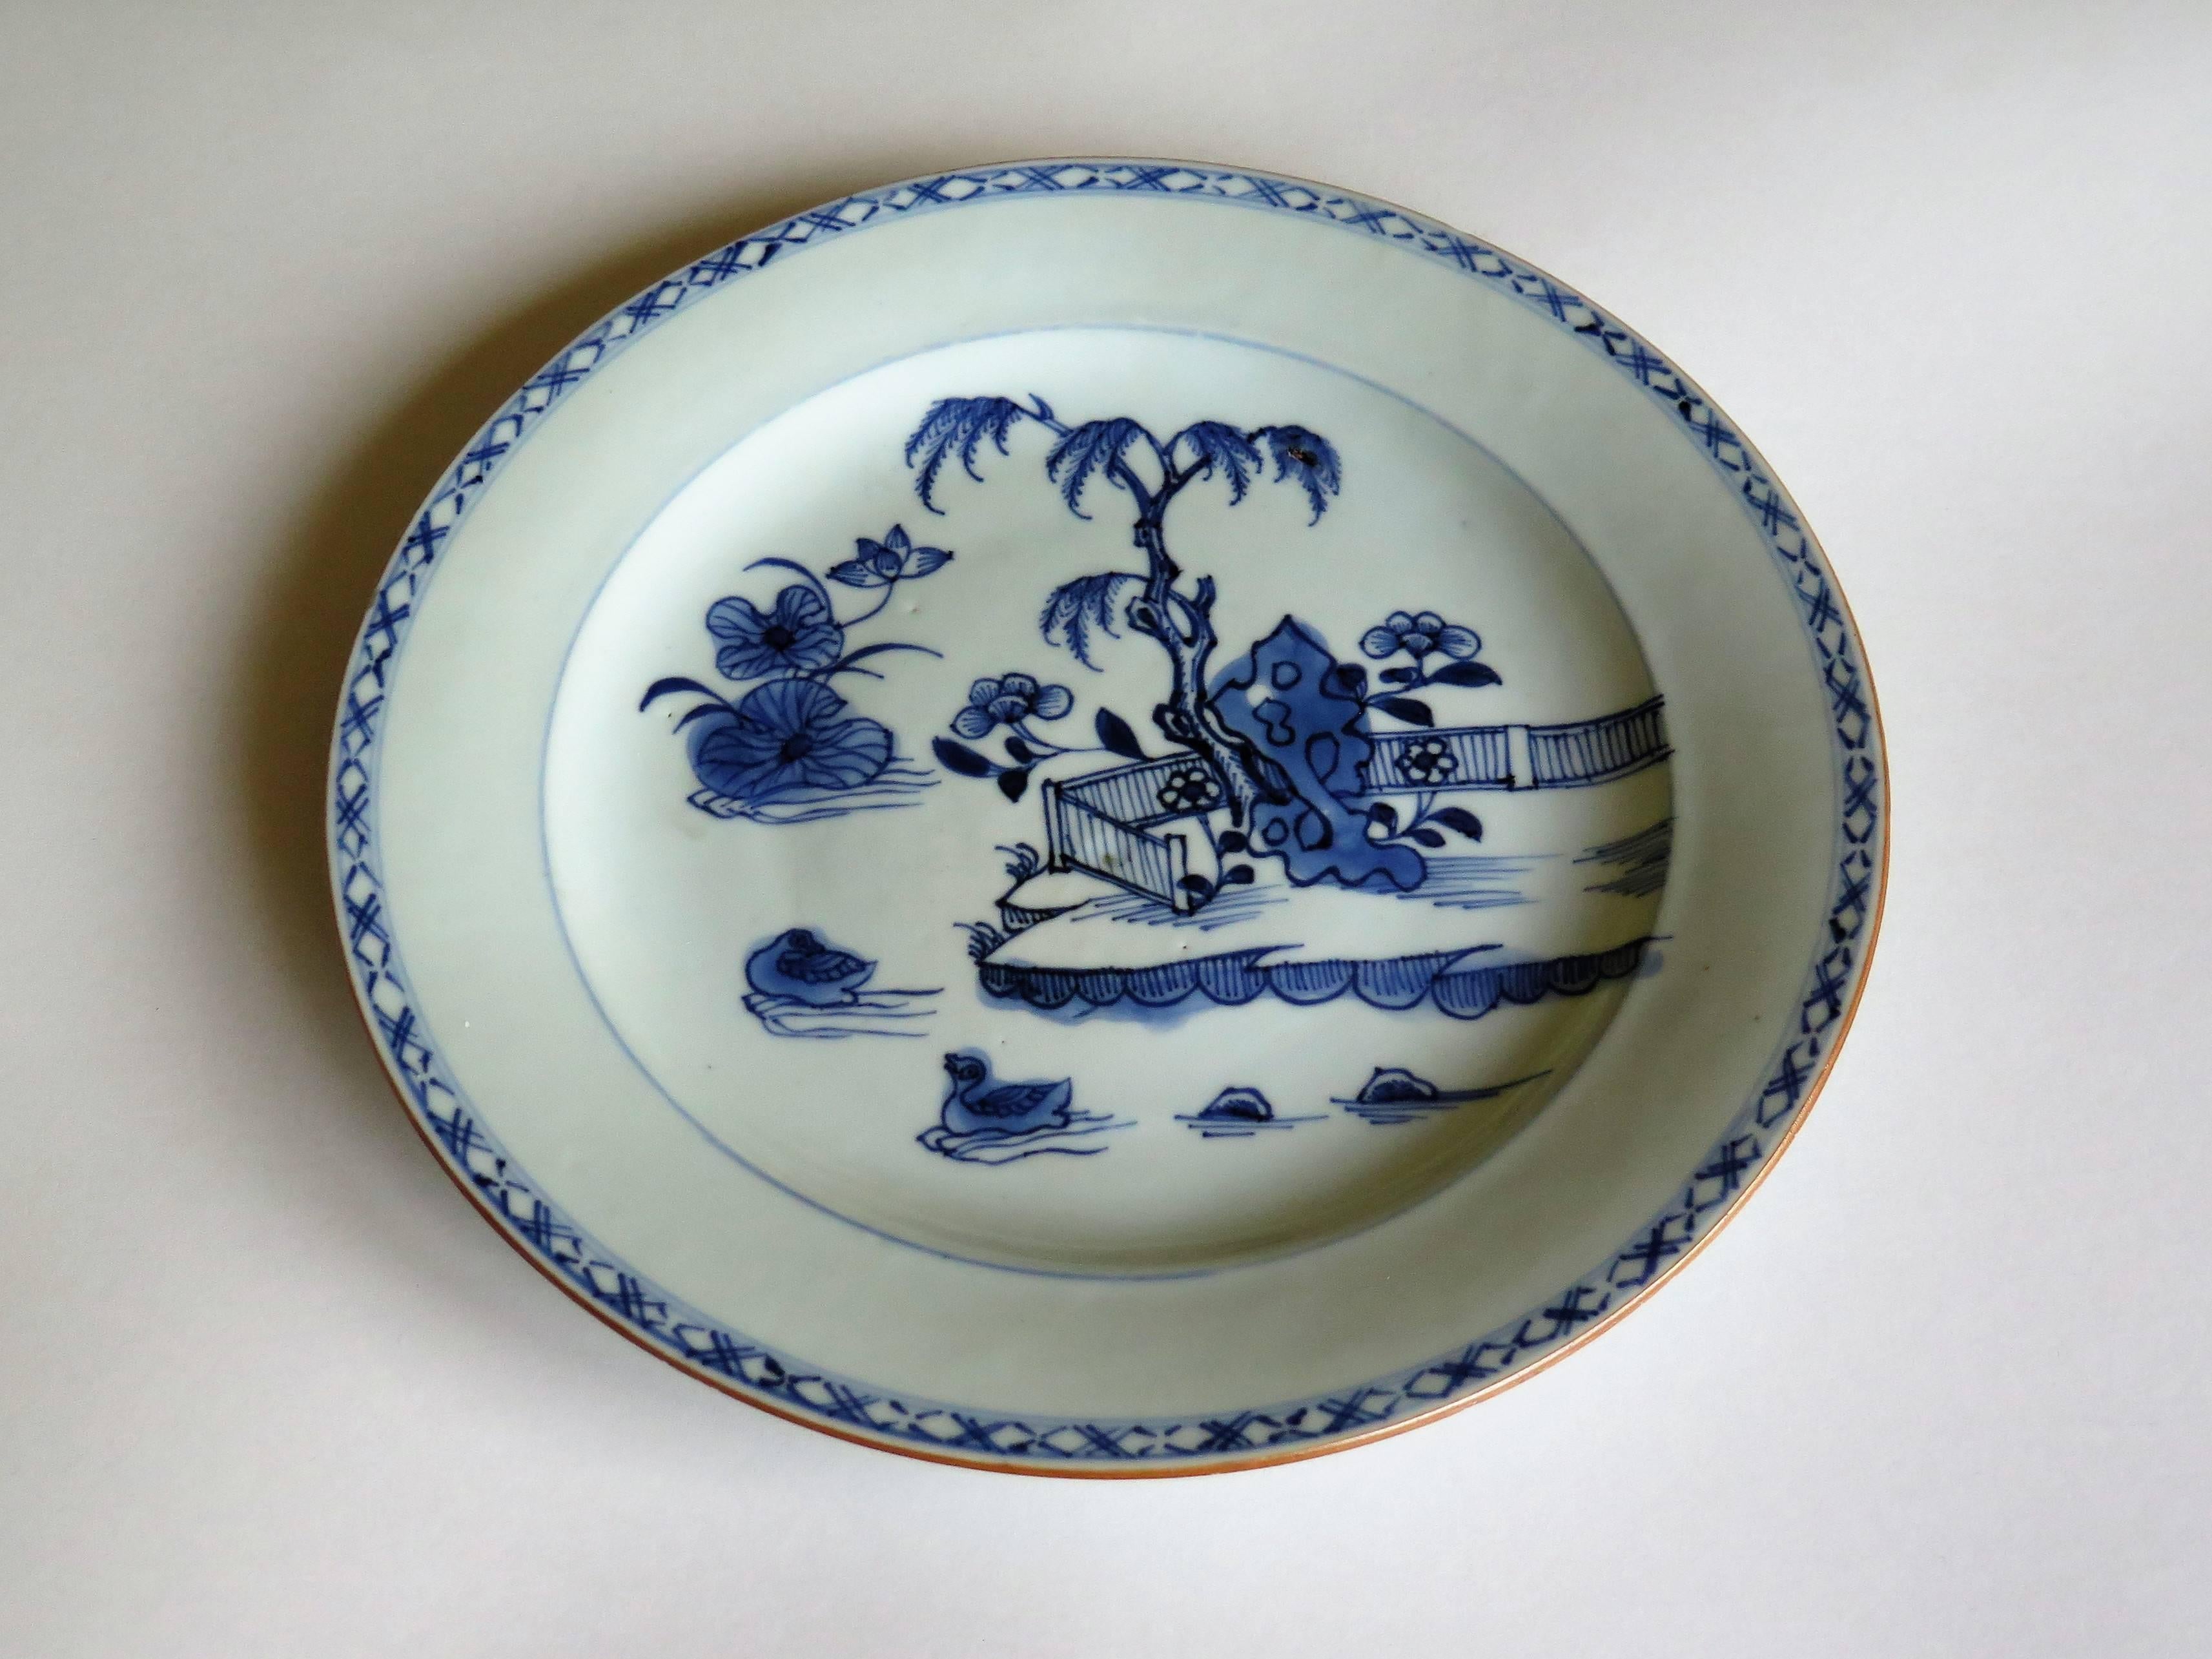 This is a nicely hand-painted Chinese blue and white porcelain plate, which we date to the second half of the 18th century, Qing Qianlong period, circa 1760.

The plate is well potted with a lovely glassy light blue glaze and a very neatly cut